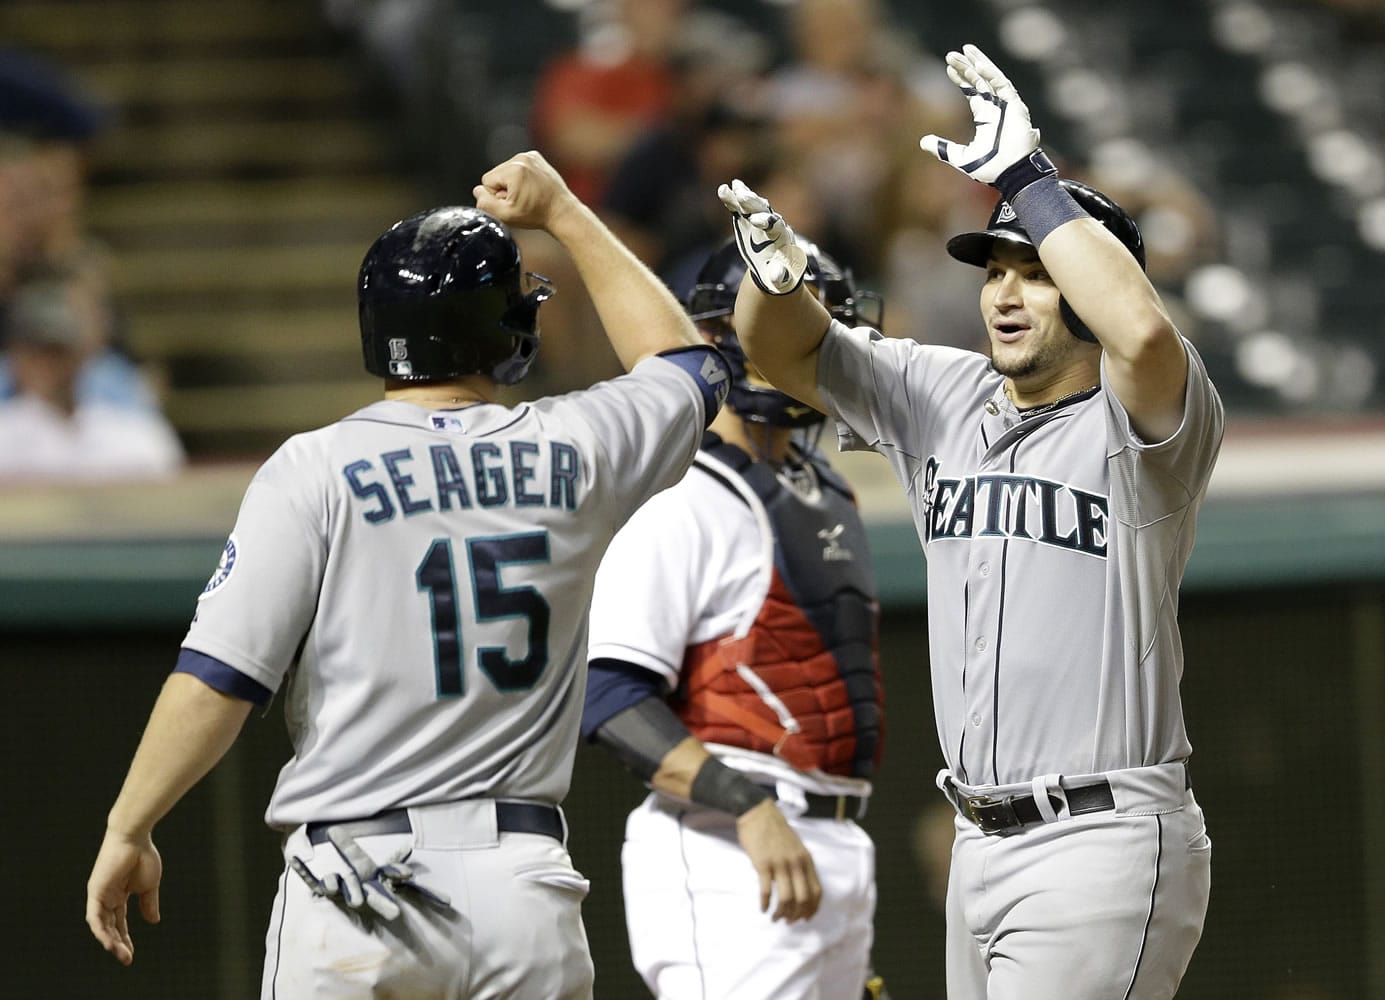 Seattle Mariners' Mike Zunino, right, is congratulated by Kyle Seager after Zunino hit a two-run home run off Cleveland Indians relief pitcher Bryan Shaw in the eighth inning Thursday, July 31, 2014, in Cleveland. Seager scored on the play.